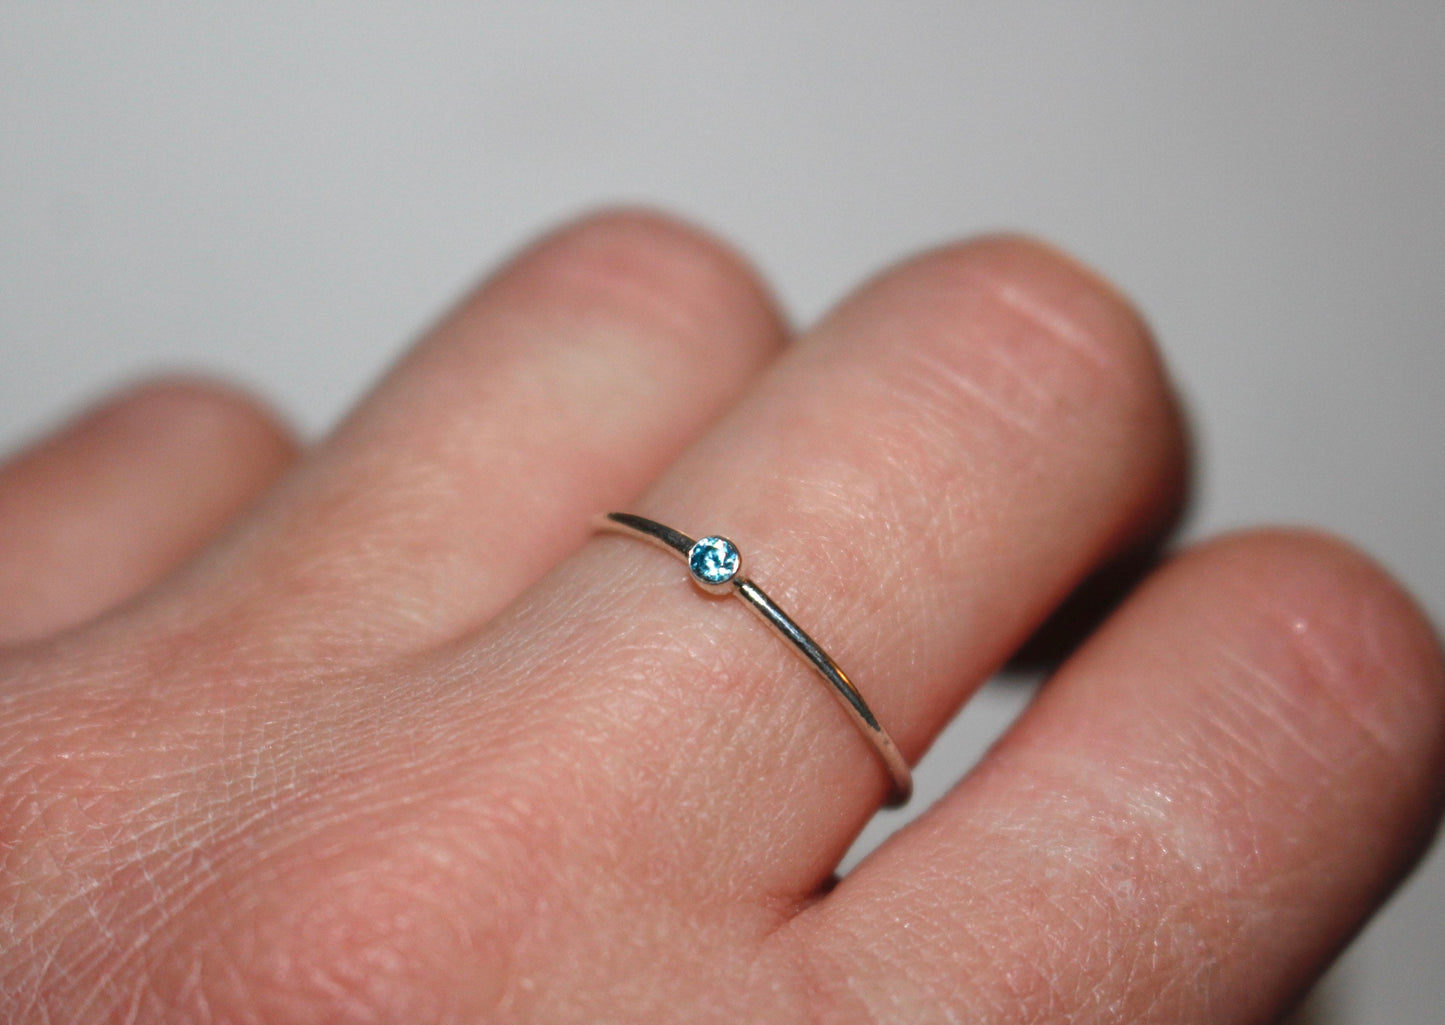 Birthstone Ring, Cubic Zirconia and Sterling Silver, Minimalist Jewelry